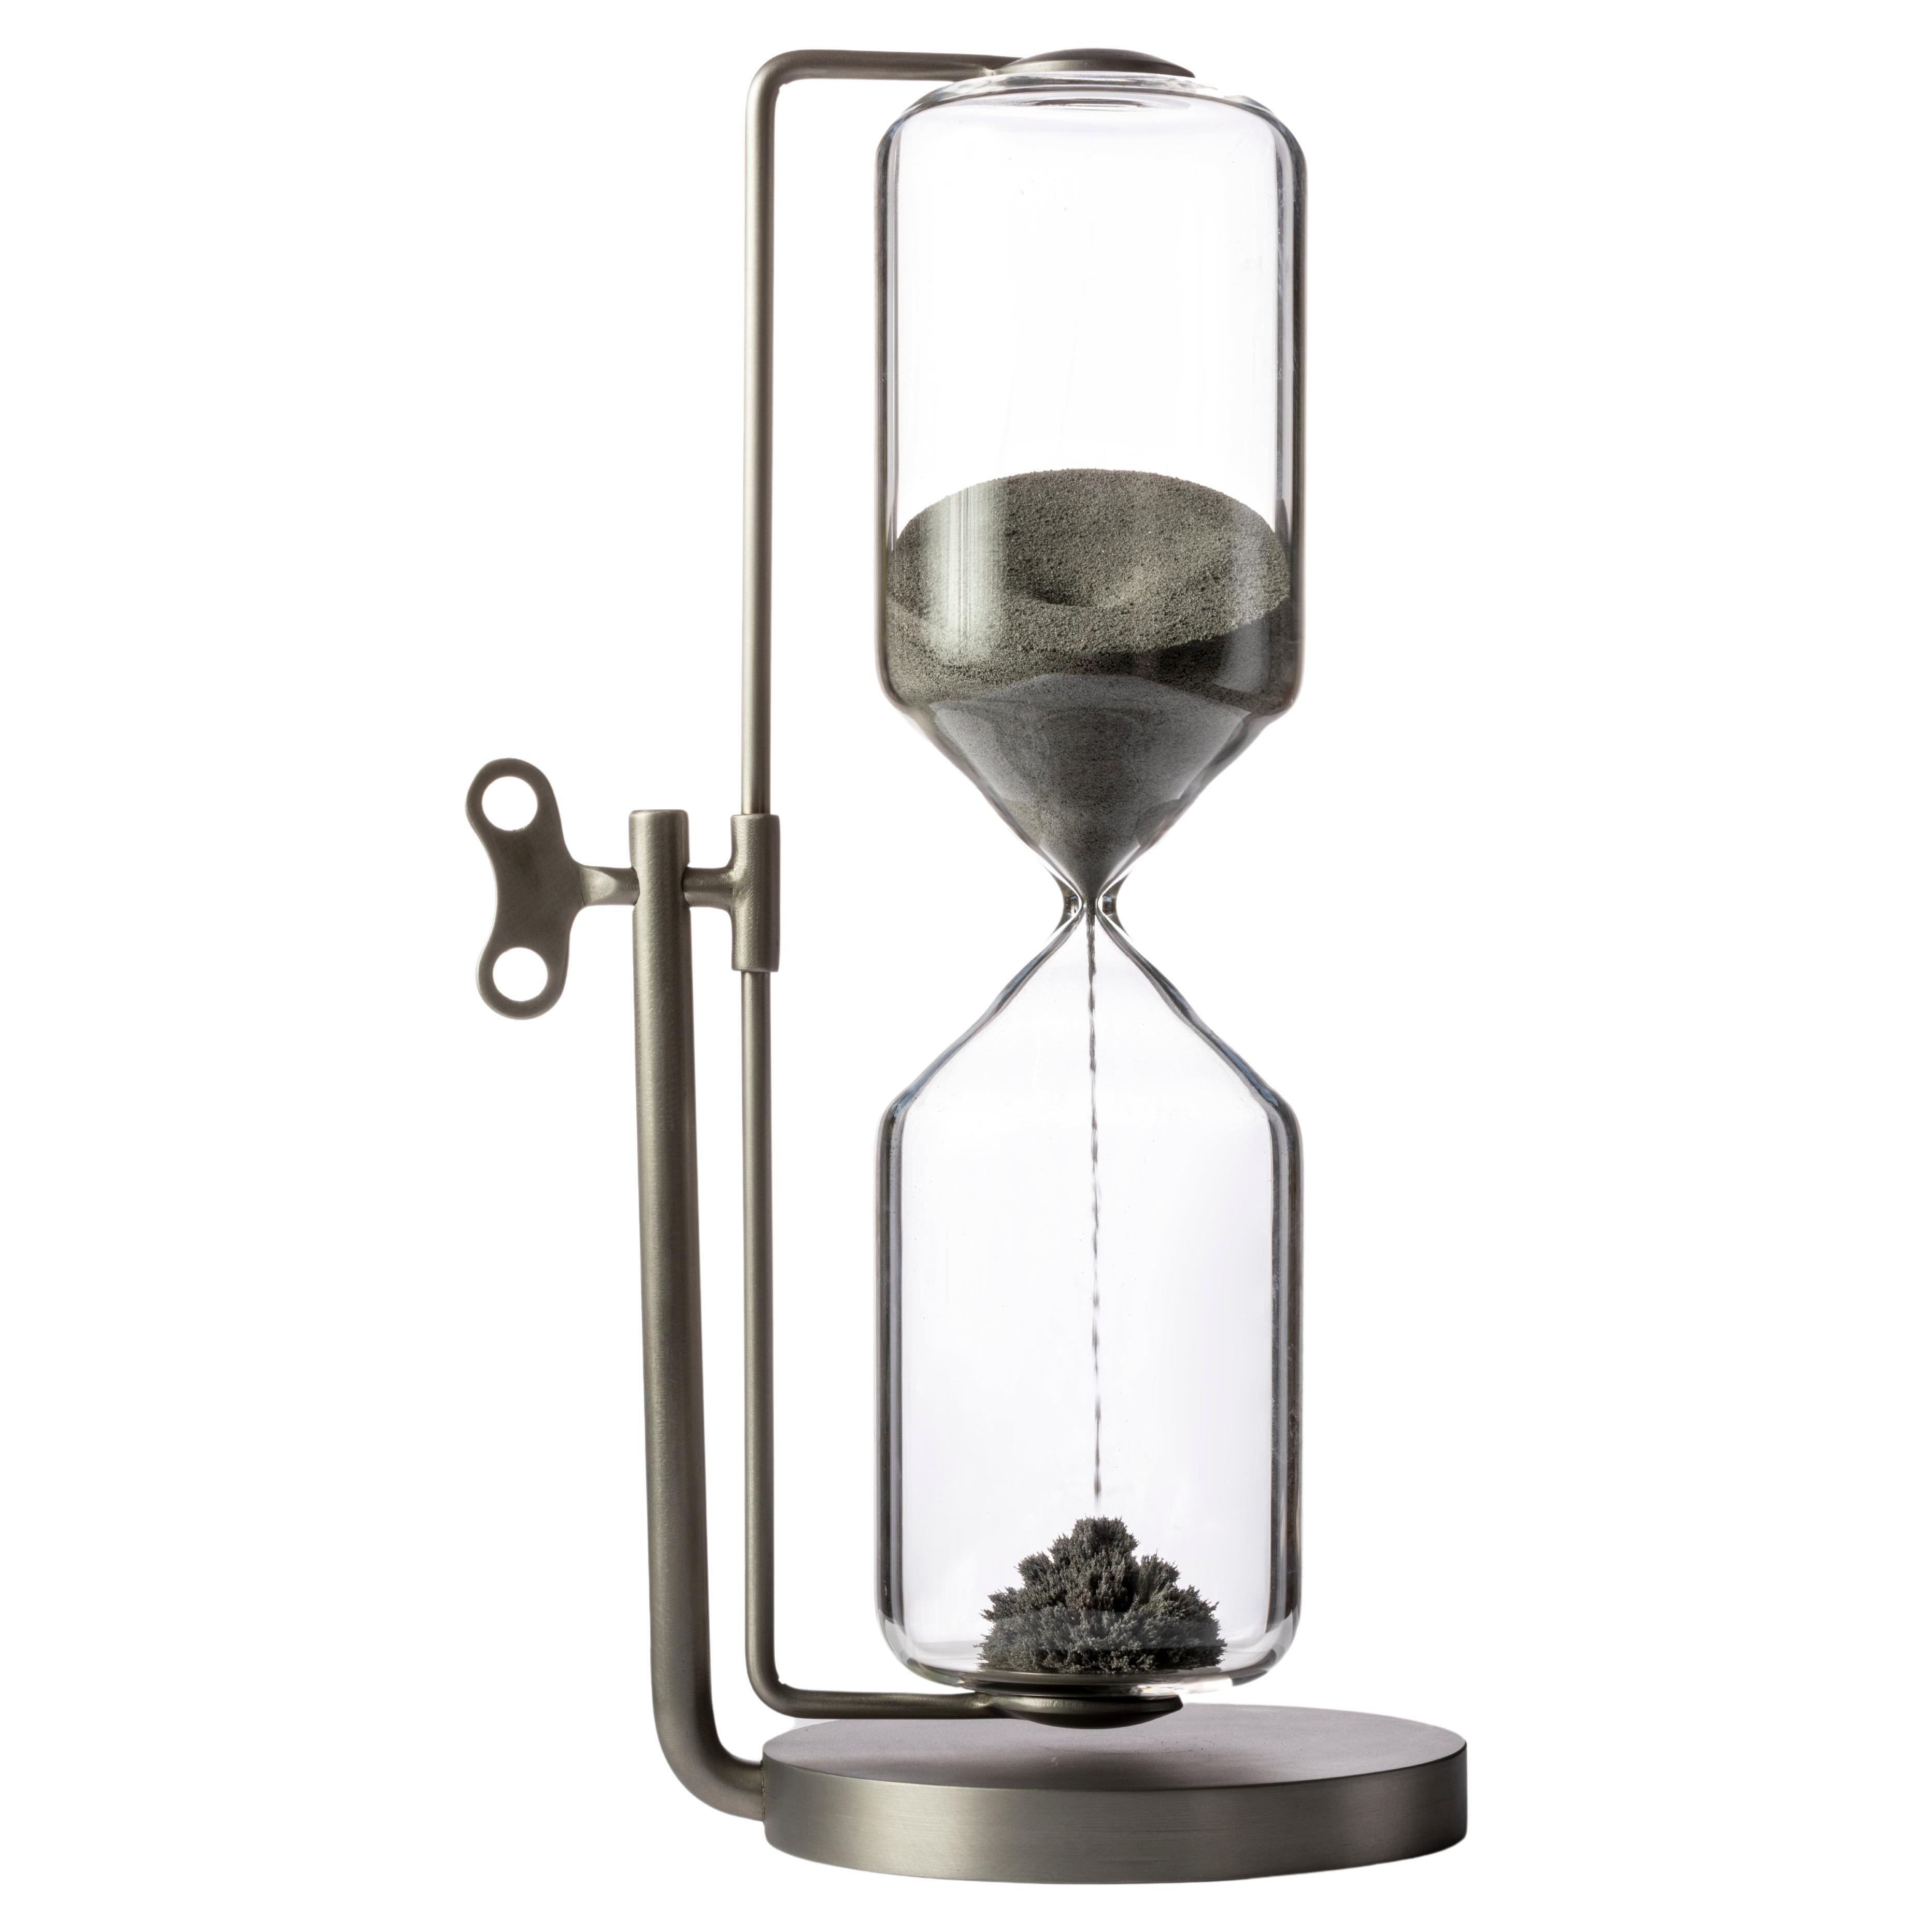 Timeless Hourglass Silver Collectible design object